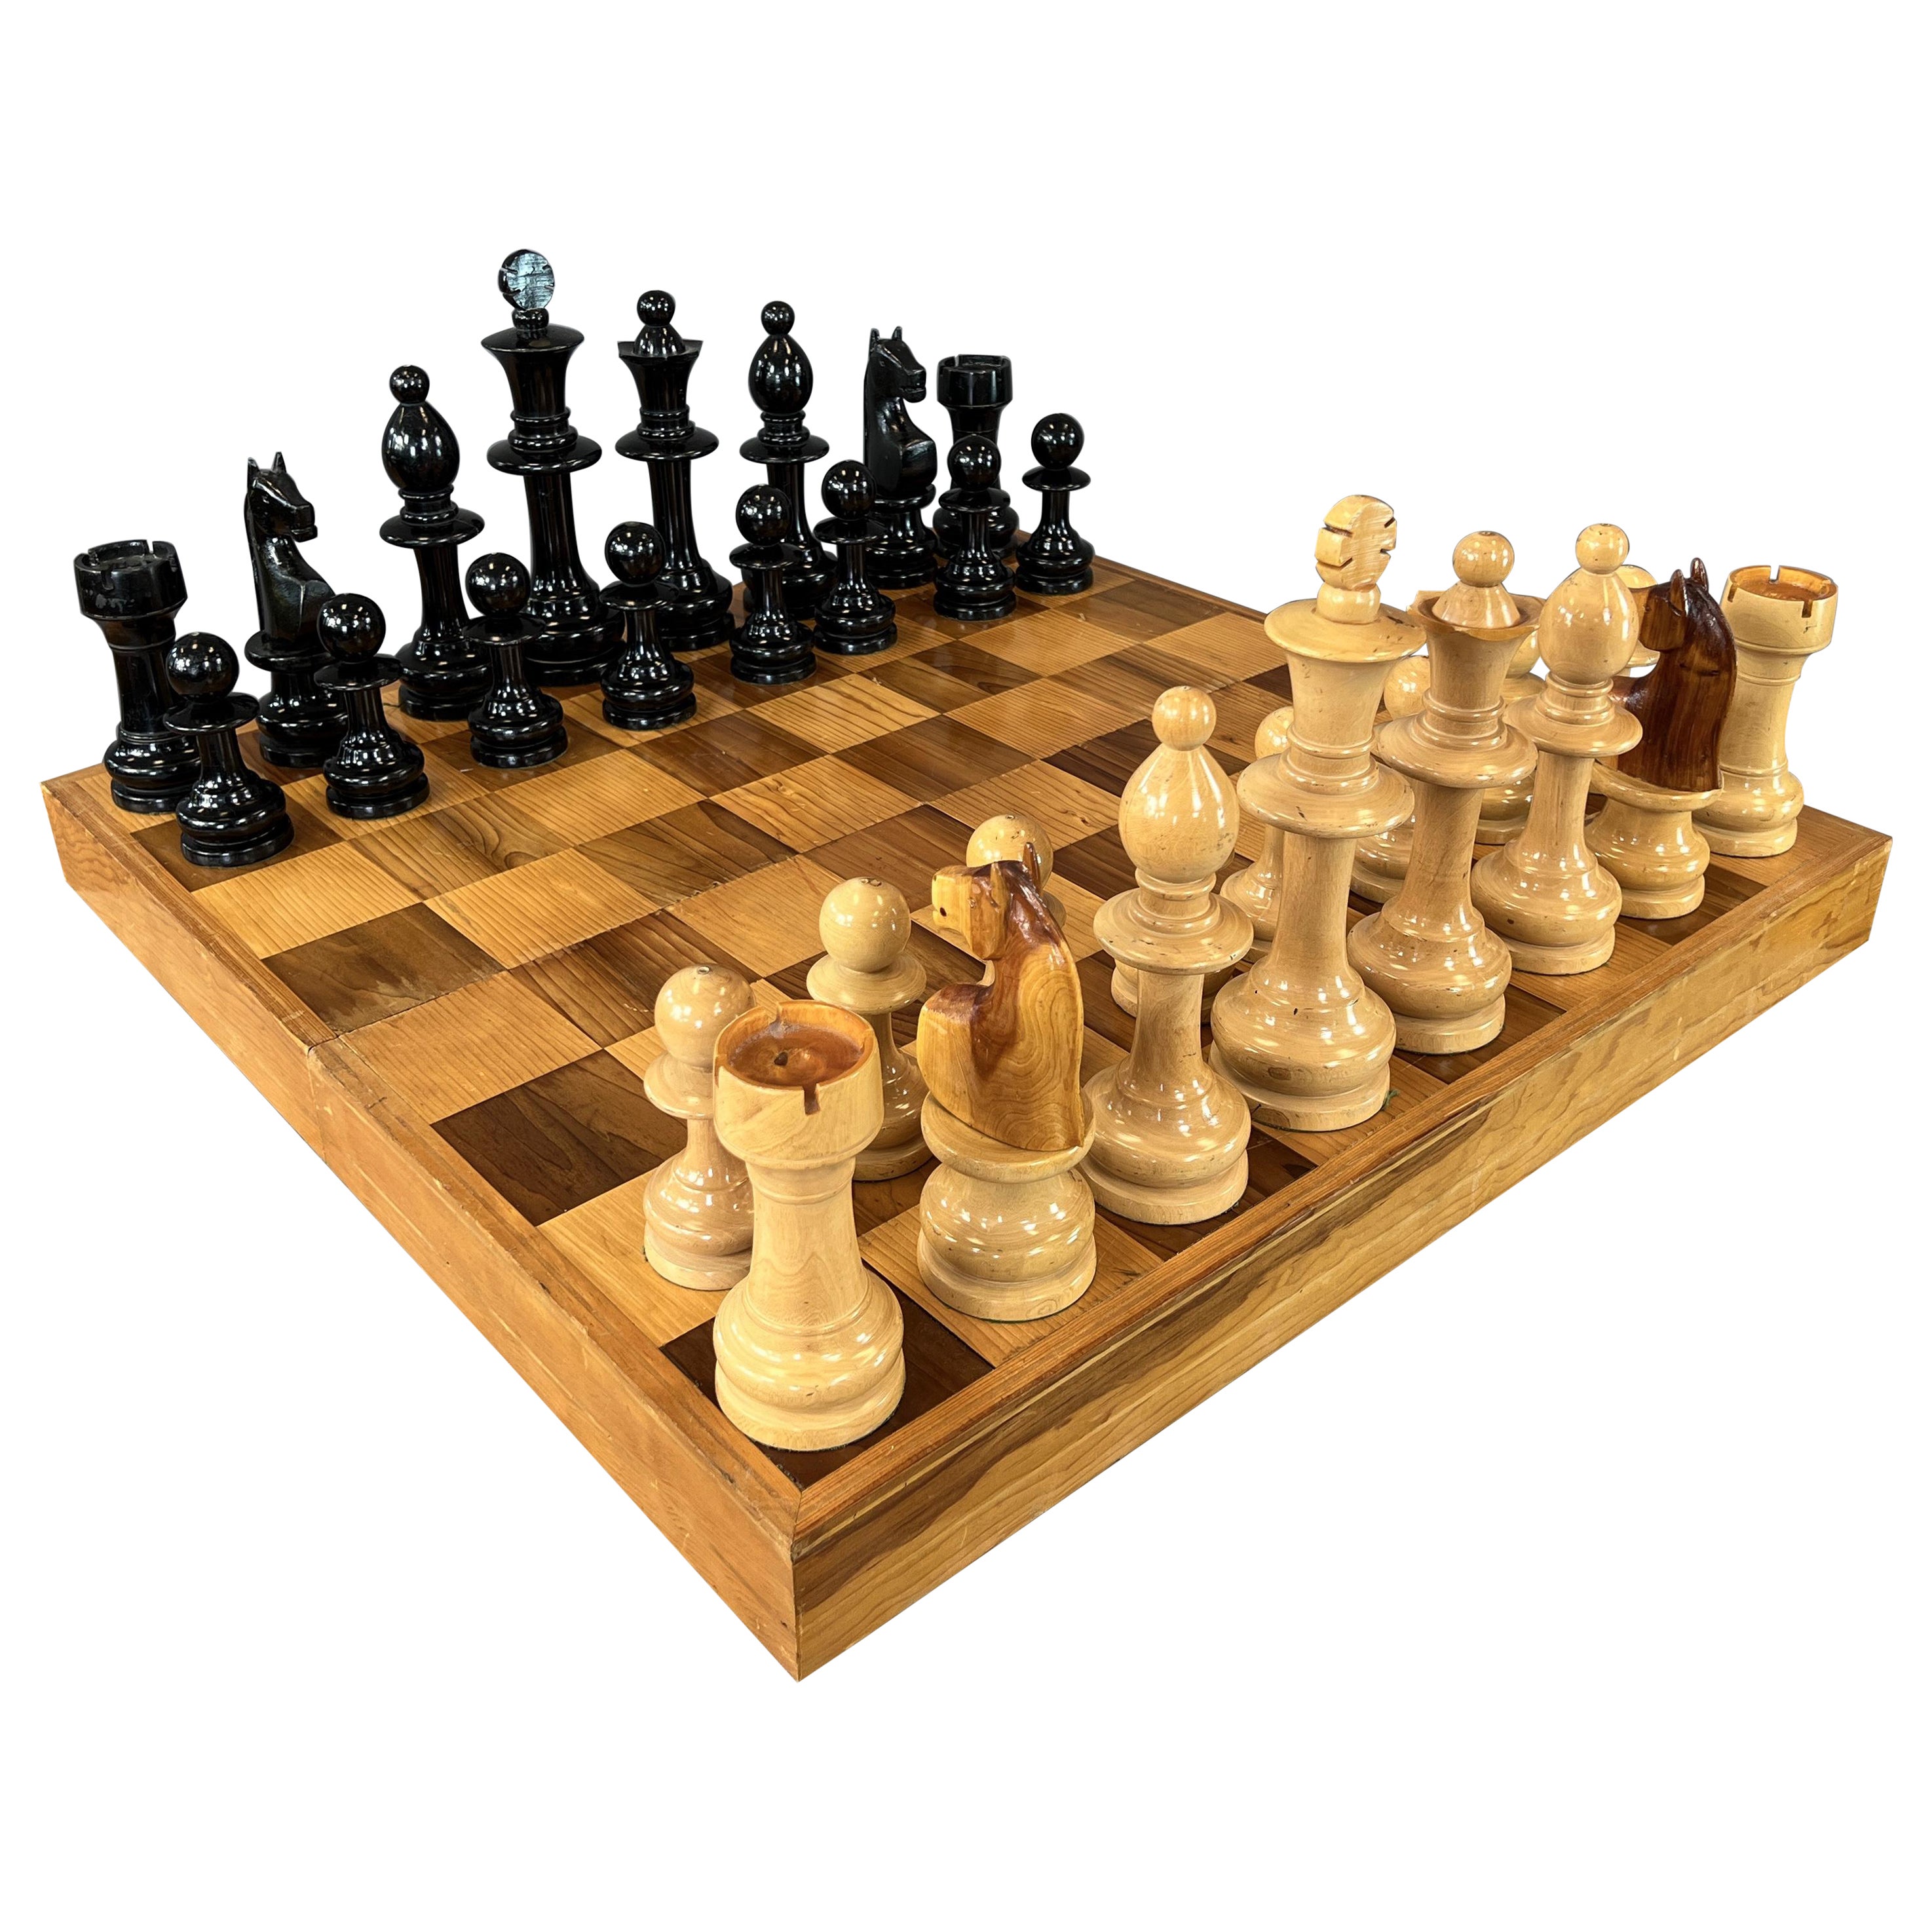 Unique & Monumental Hand Crafted Wooden Chess Set 33pc